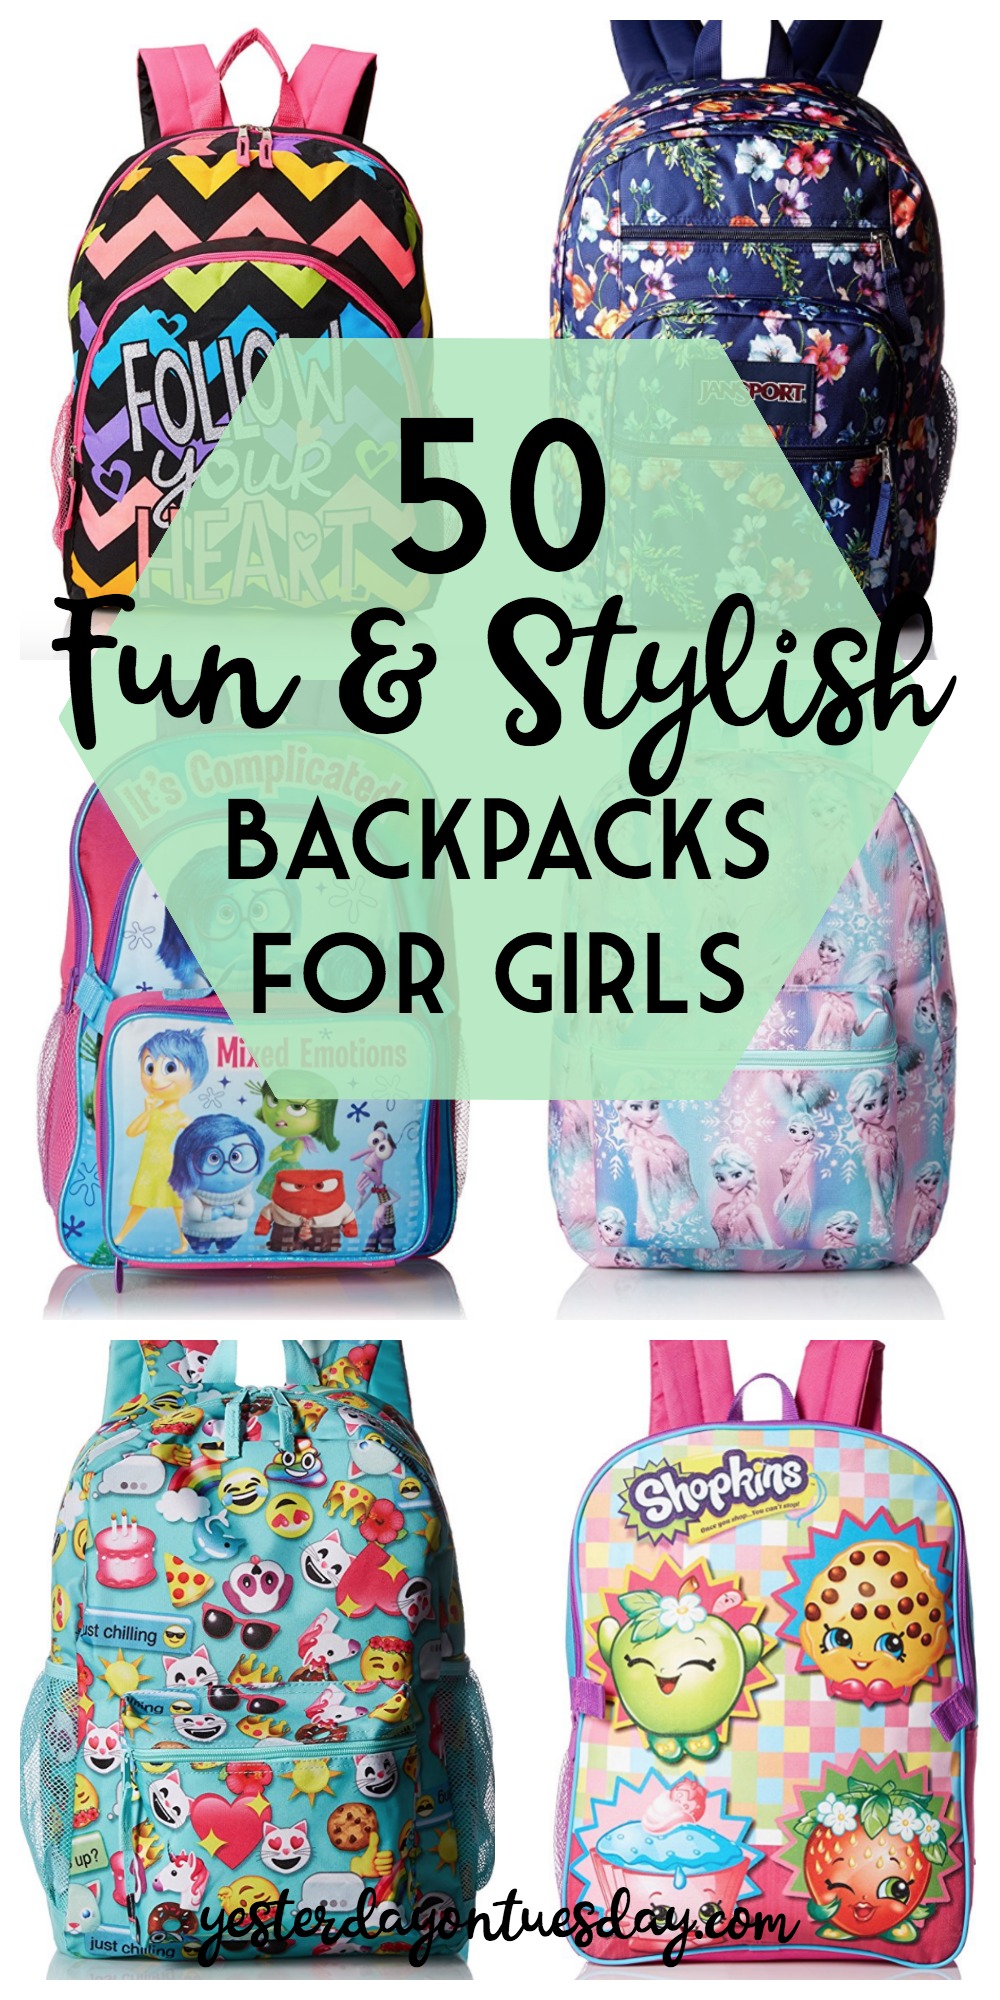 Awesome backpacks to buy for girls